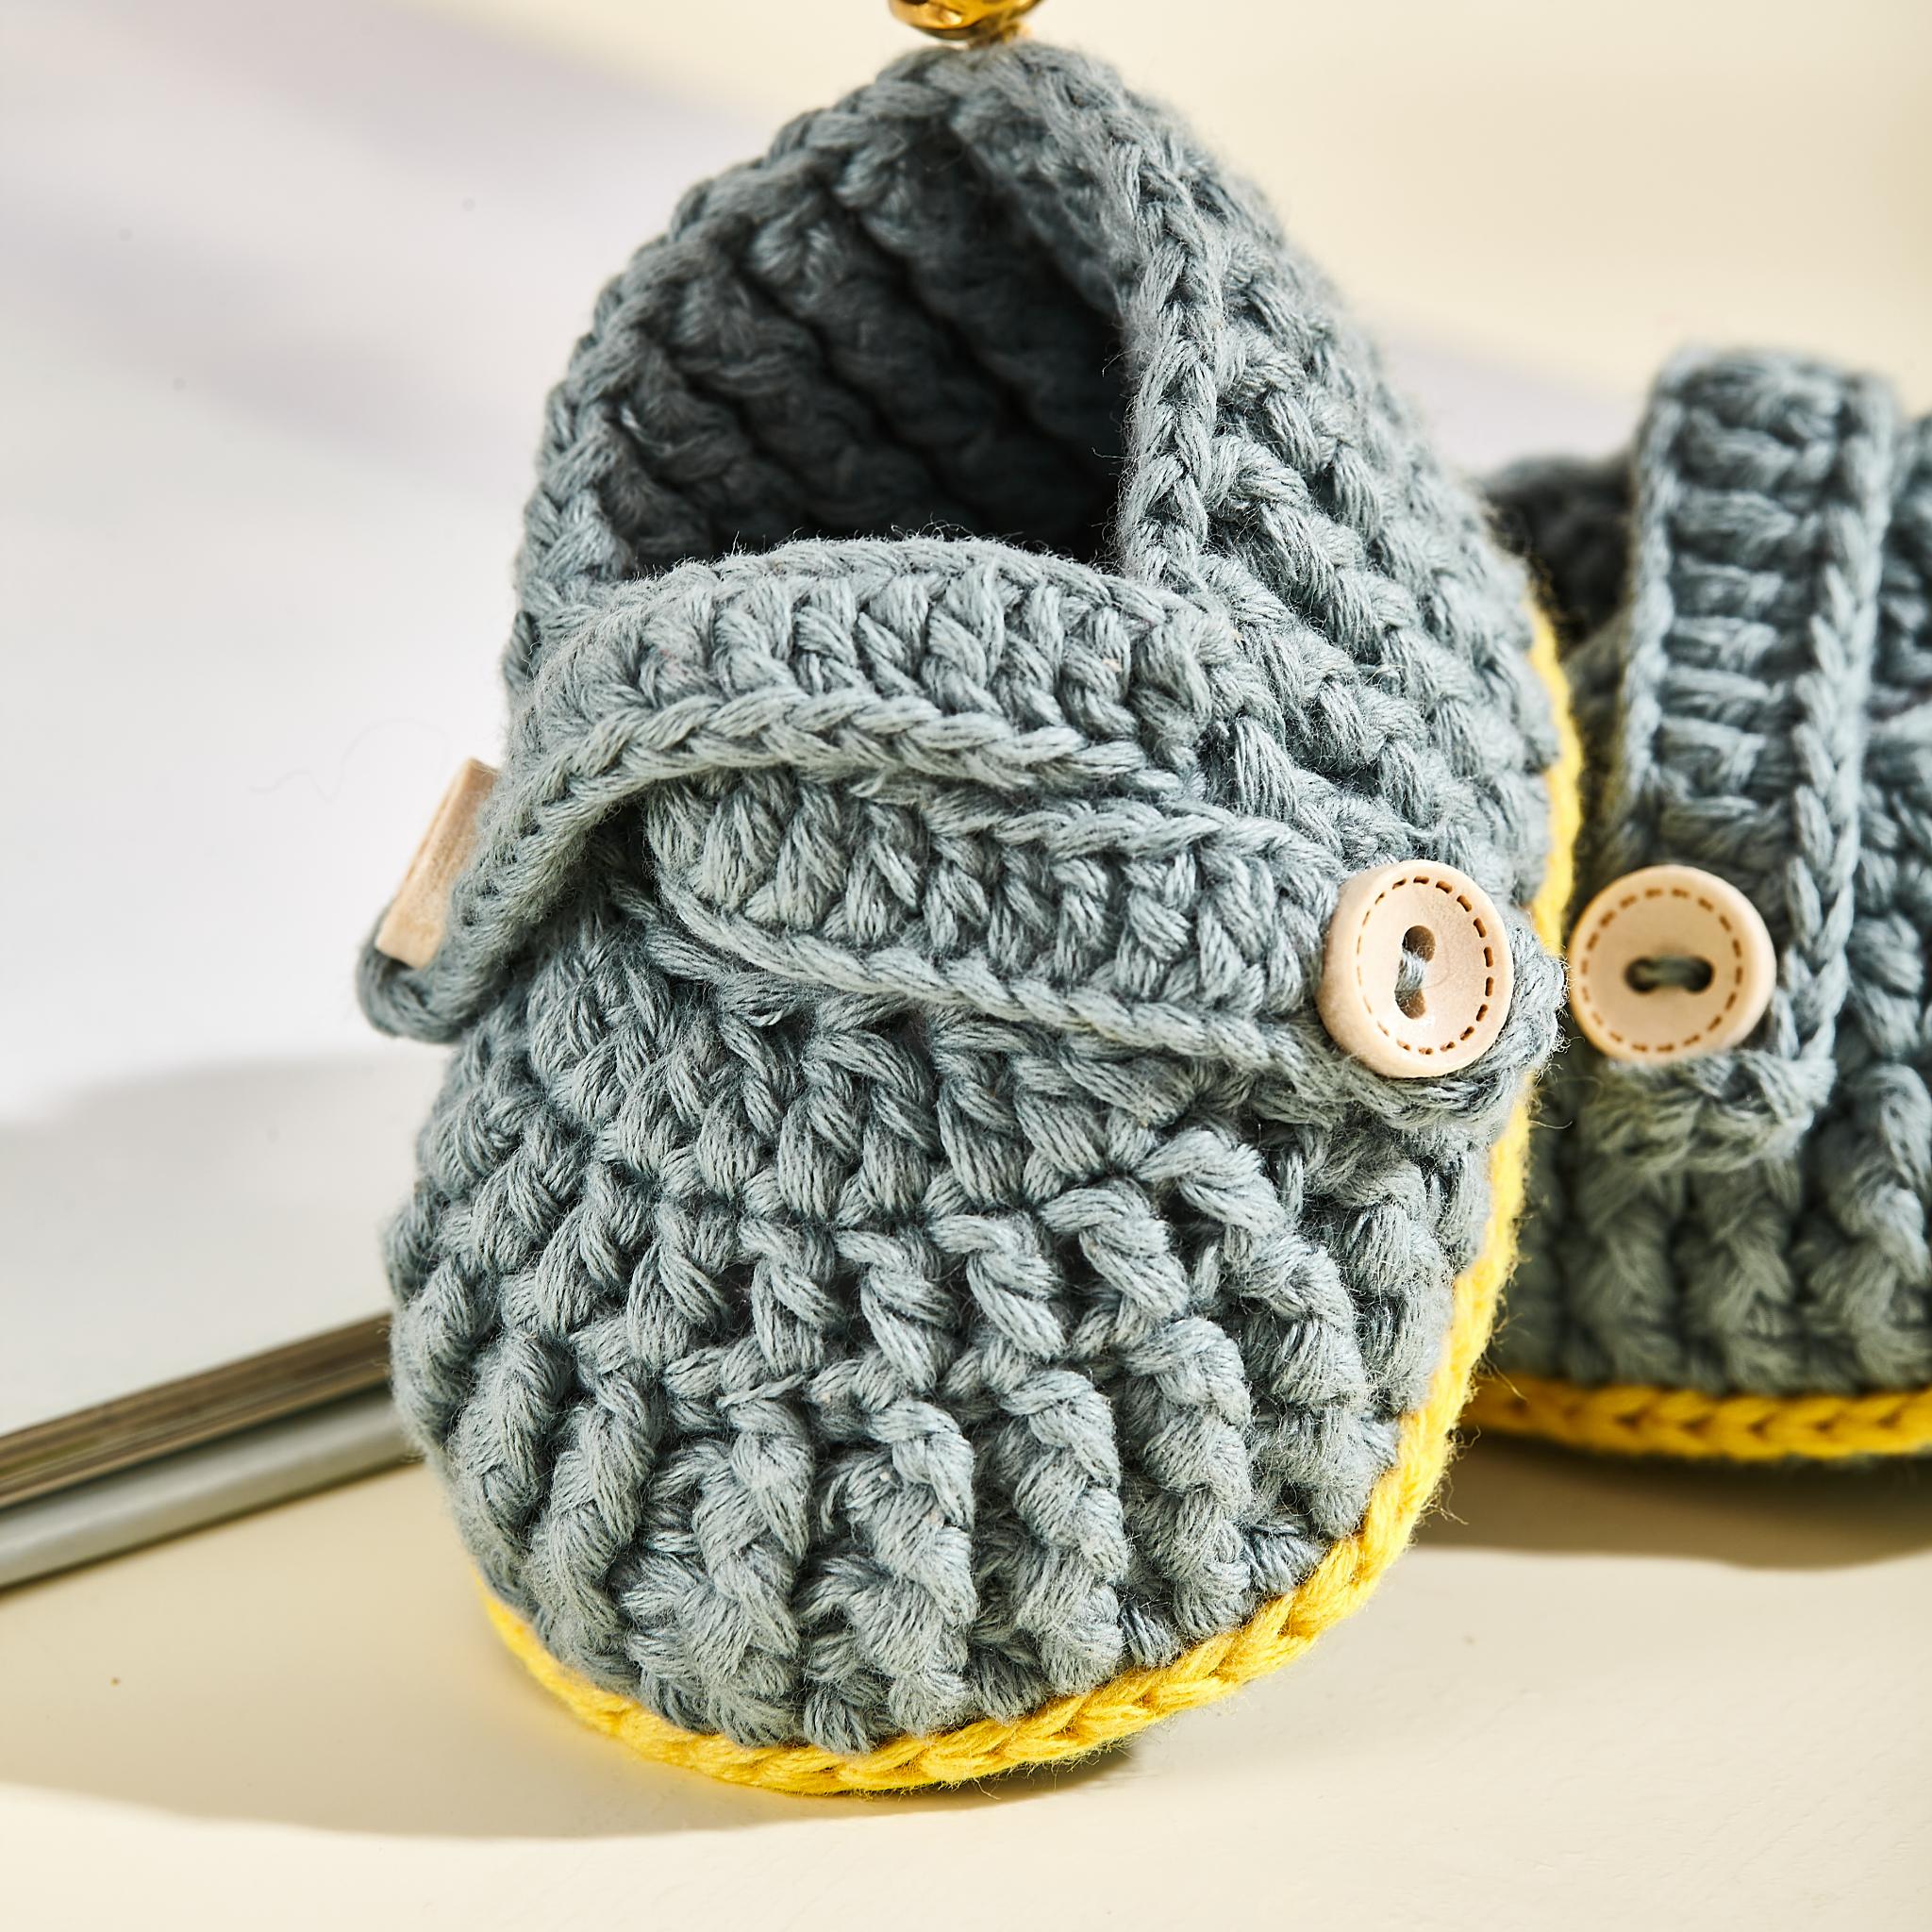 Baby shoes made from organic cotton